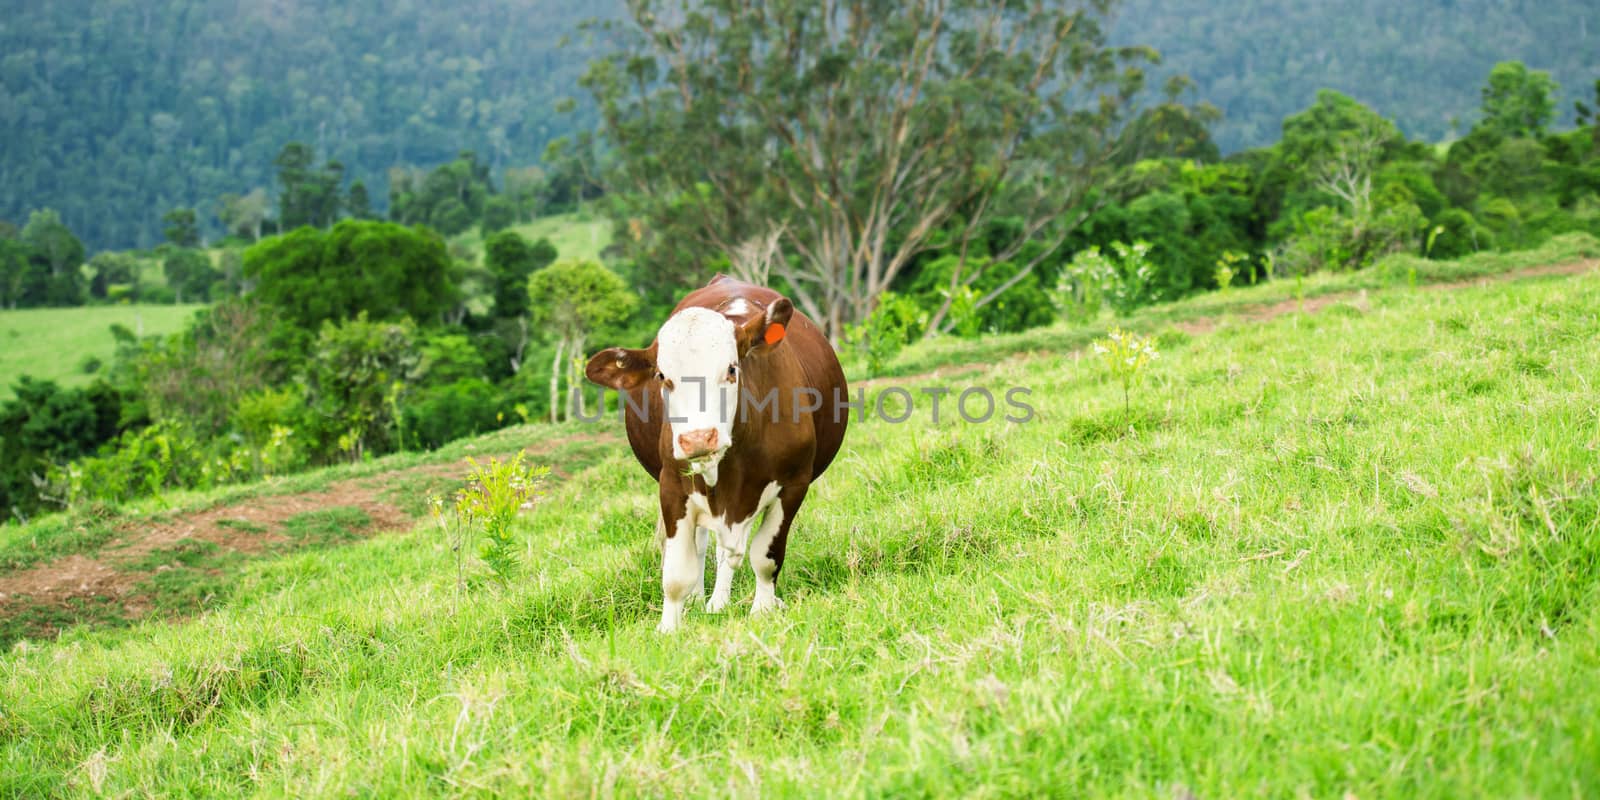 Cow in the paddock during the day in Queensland